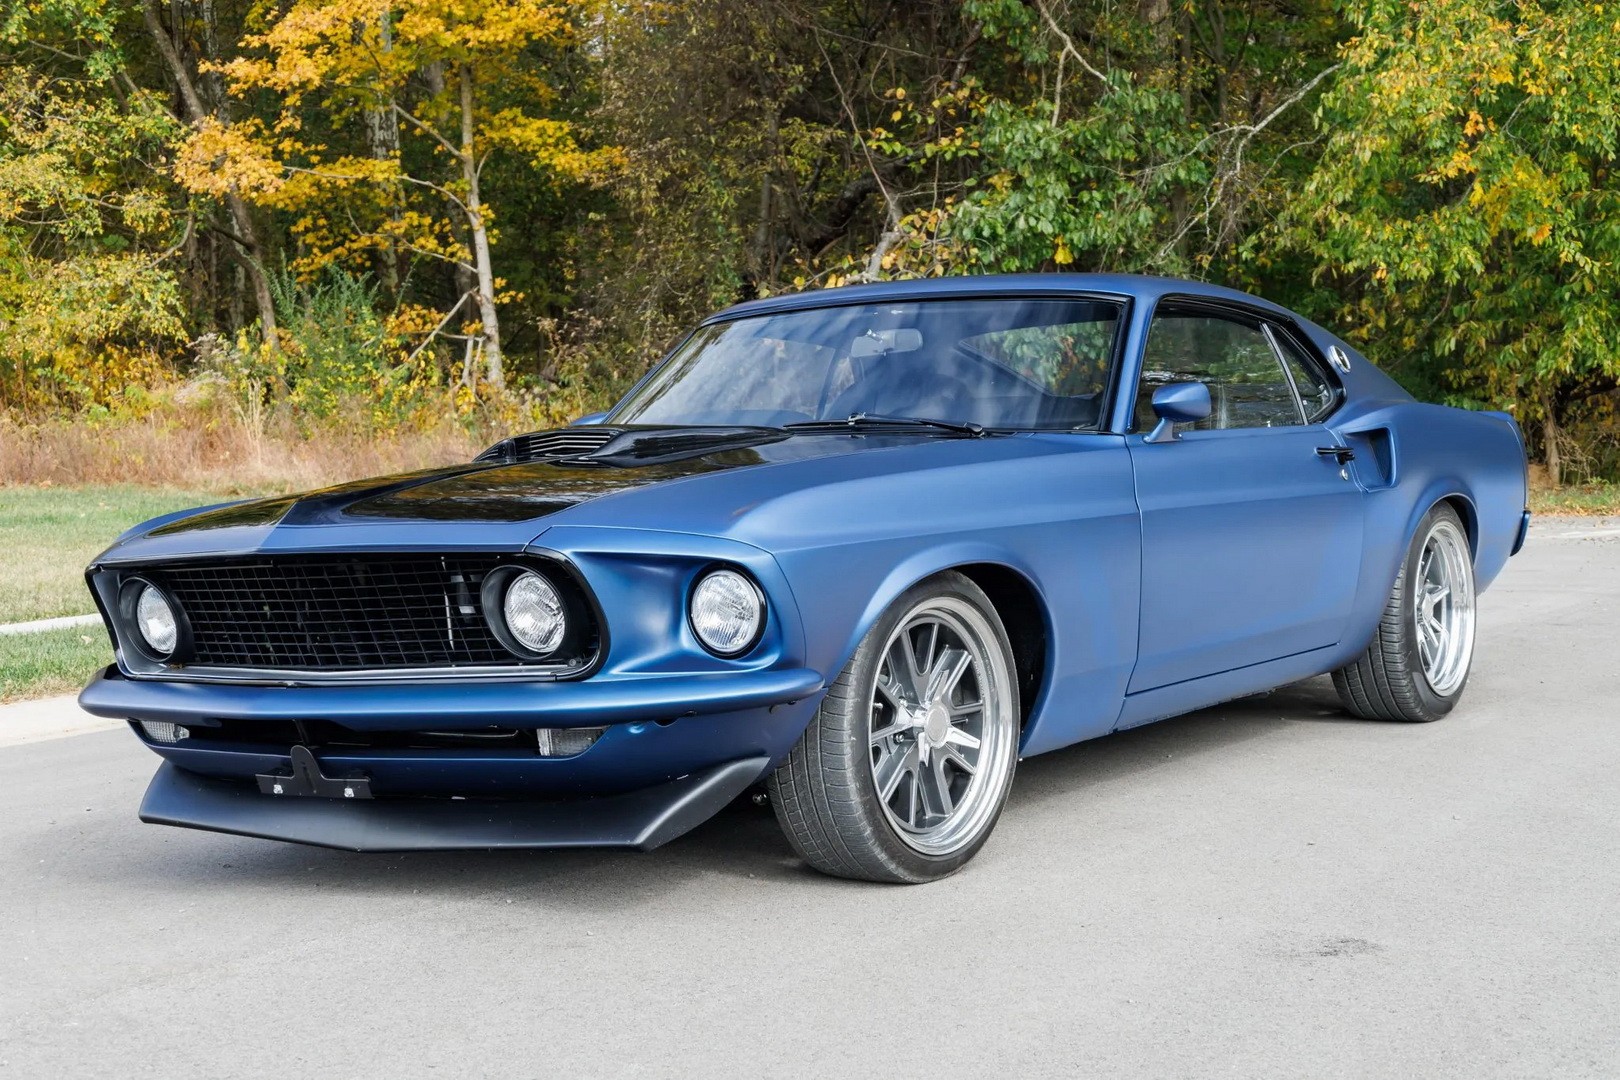 Custom 1969 Ford Mustang Mach 1 Rides Low, Doesn’t Drive Slow: Crate ...